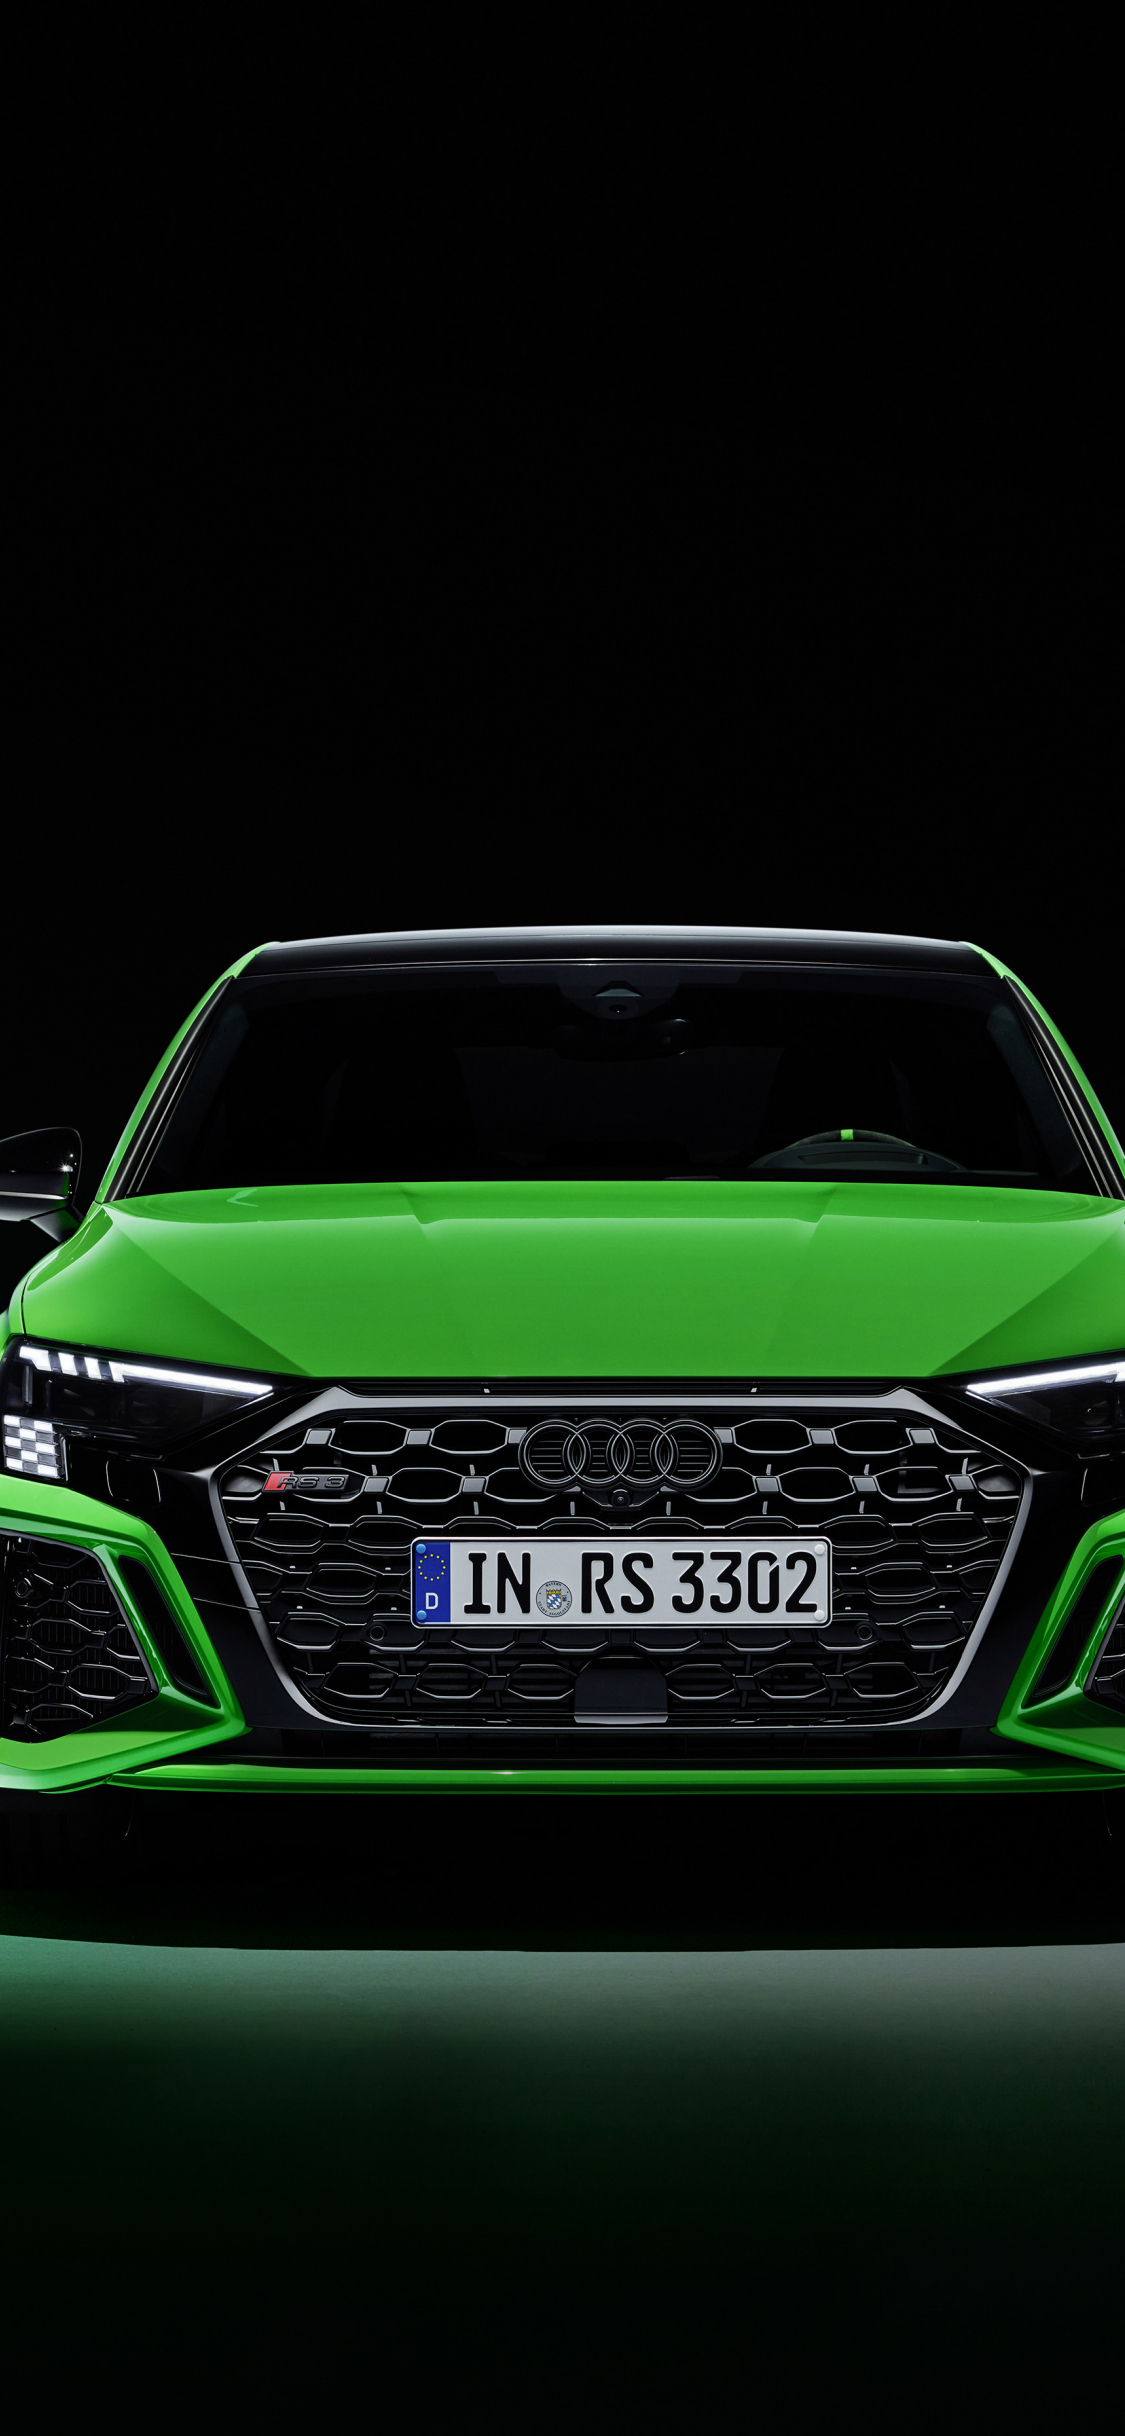 Download wallpaper 1125x2436 front-view, audi rs3, sedan car, iphone x,  1125x2436 hd background, 27247